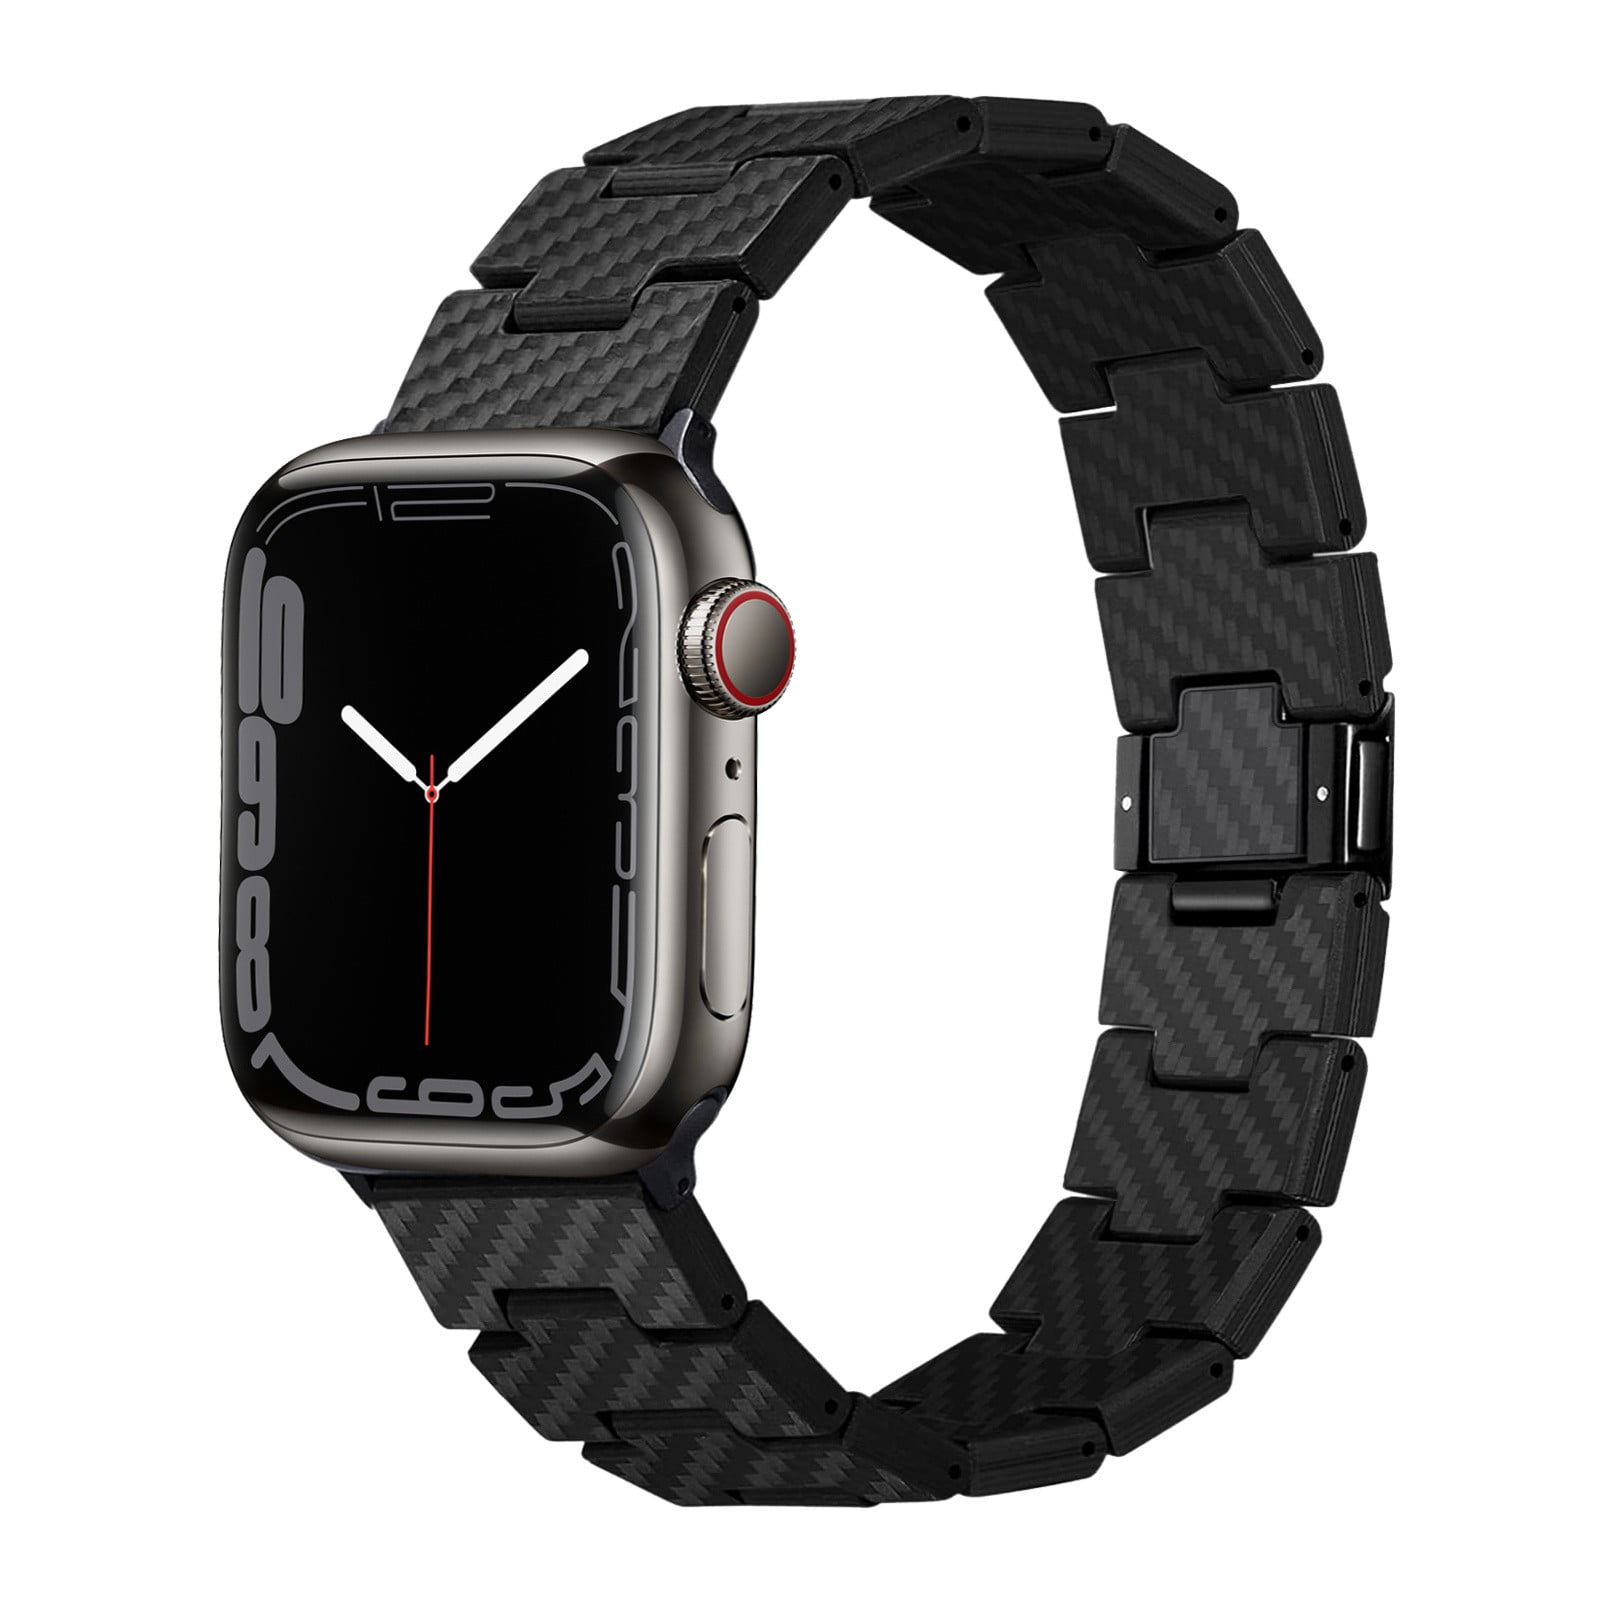 Carbon Fiber Apple Watch Bands (Black, 41mm / 40mm / 38mm) by Epic Watch Bands